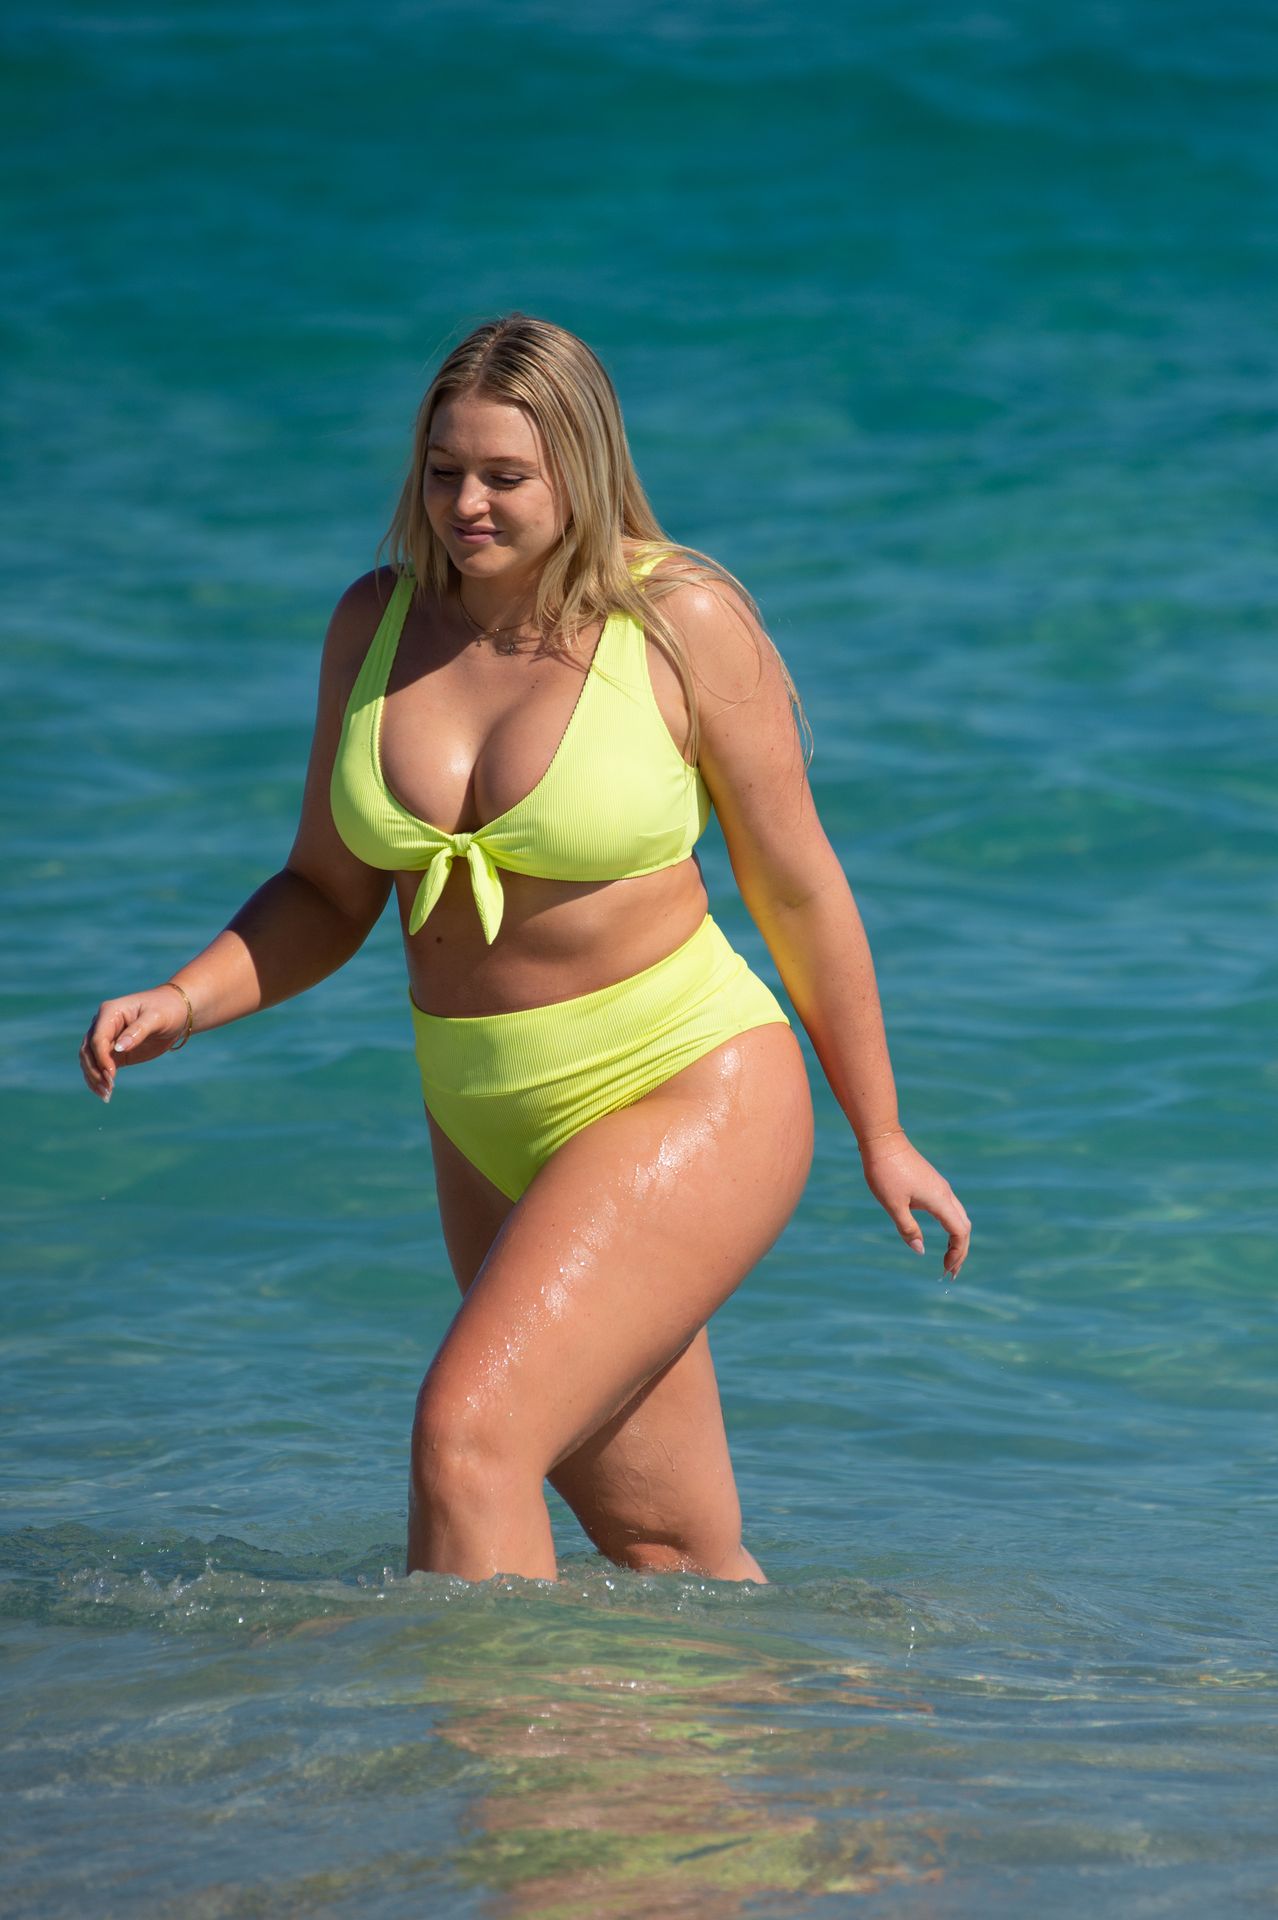 Wet and Hot Iskra Lawrence Showcasing Her Body in a Good-Looking Bikini